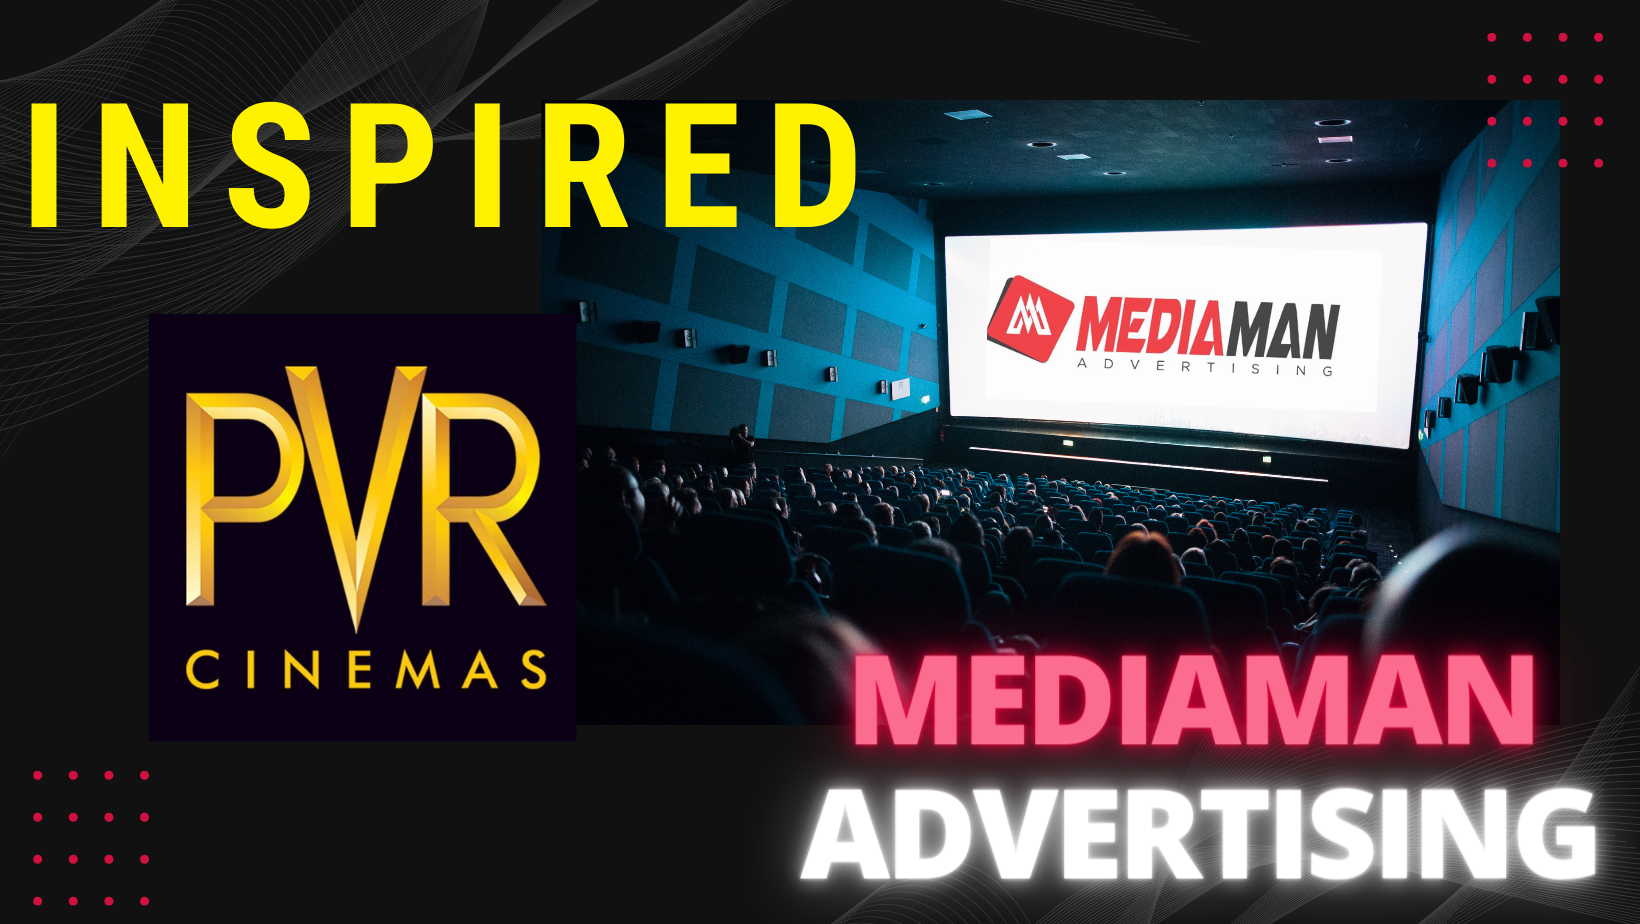 Frequently asked questions about Cinema Advertising